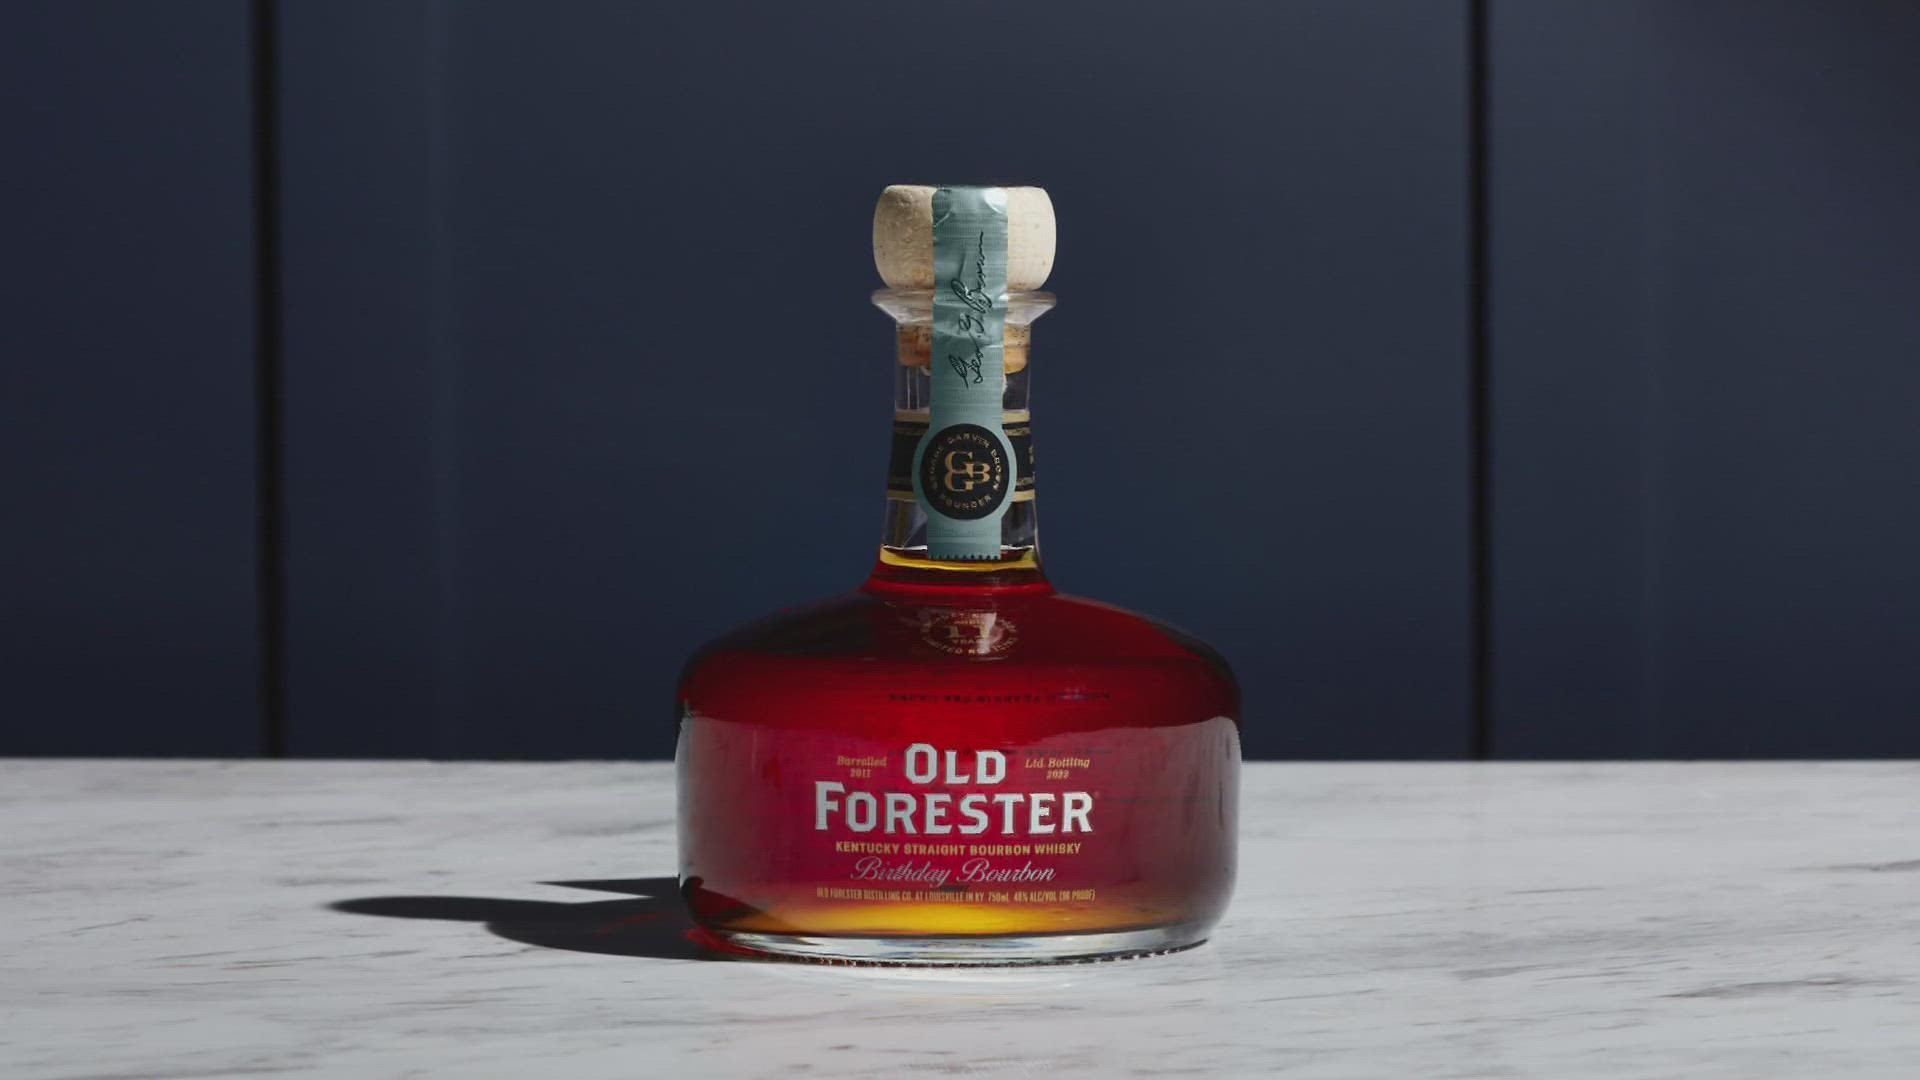 For the first time since it's been released, Old Forrester is opening up the chance to win an exclusive bottle of its September only birthday bourbon.